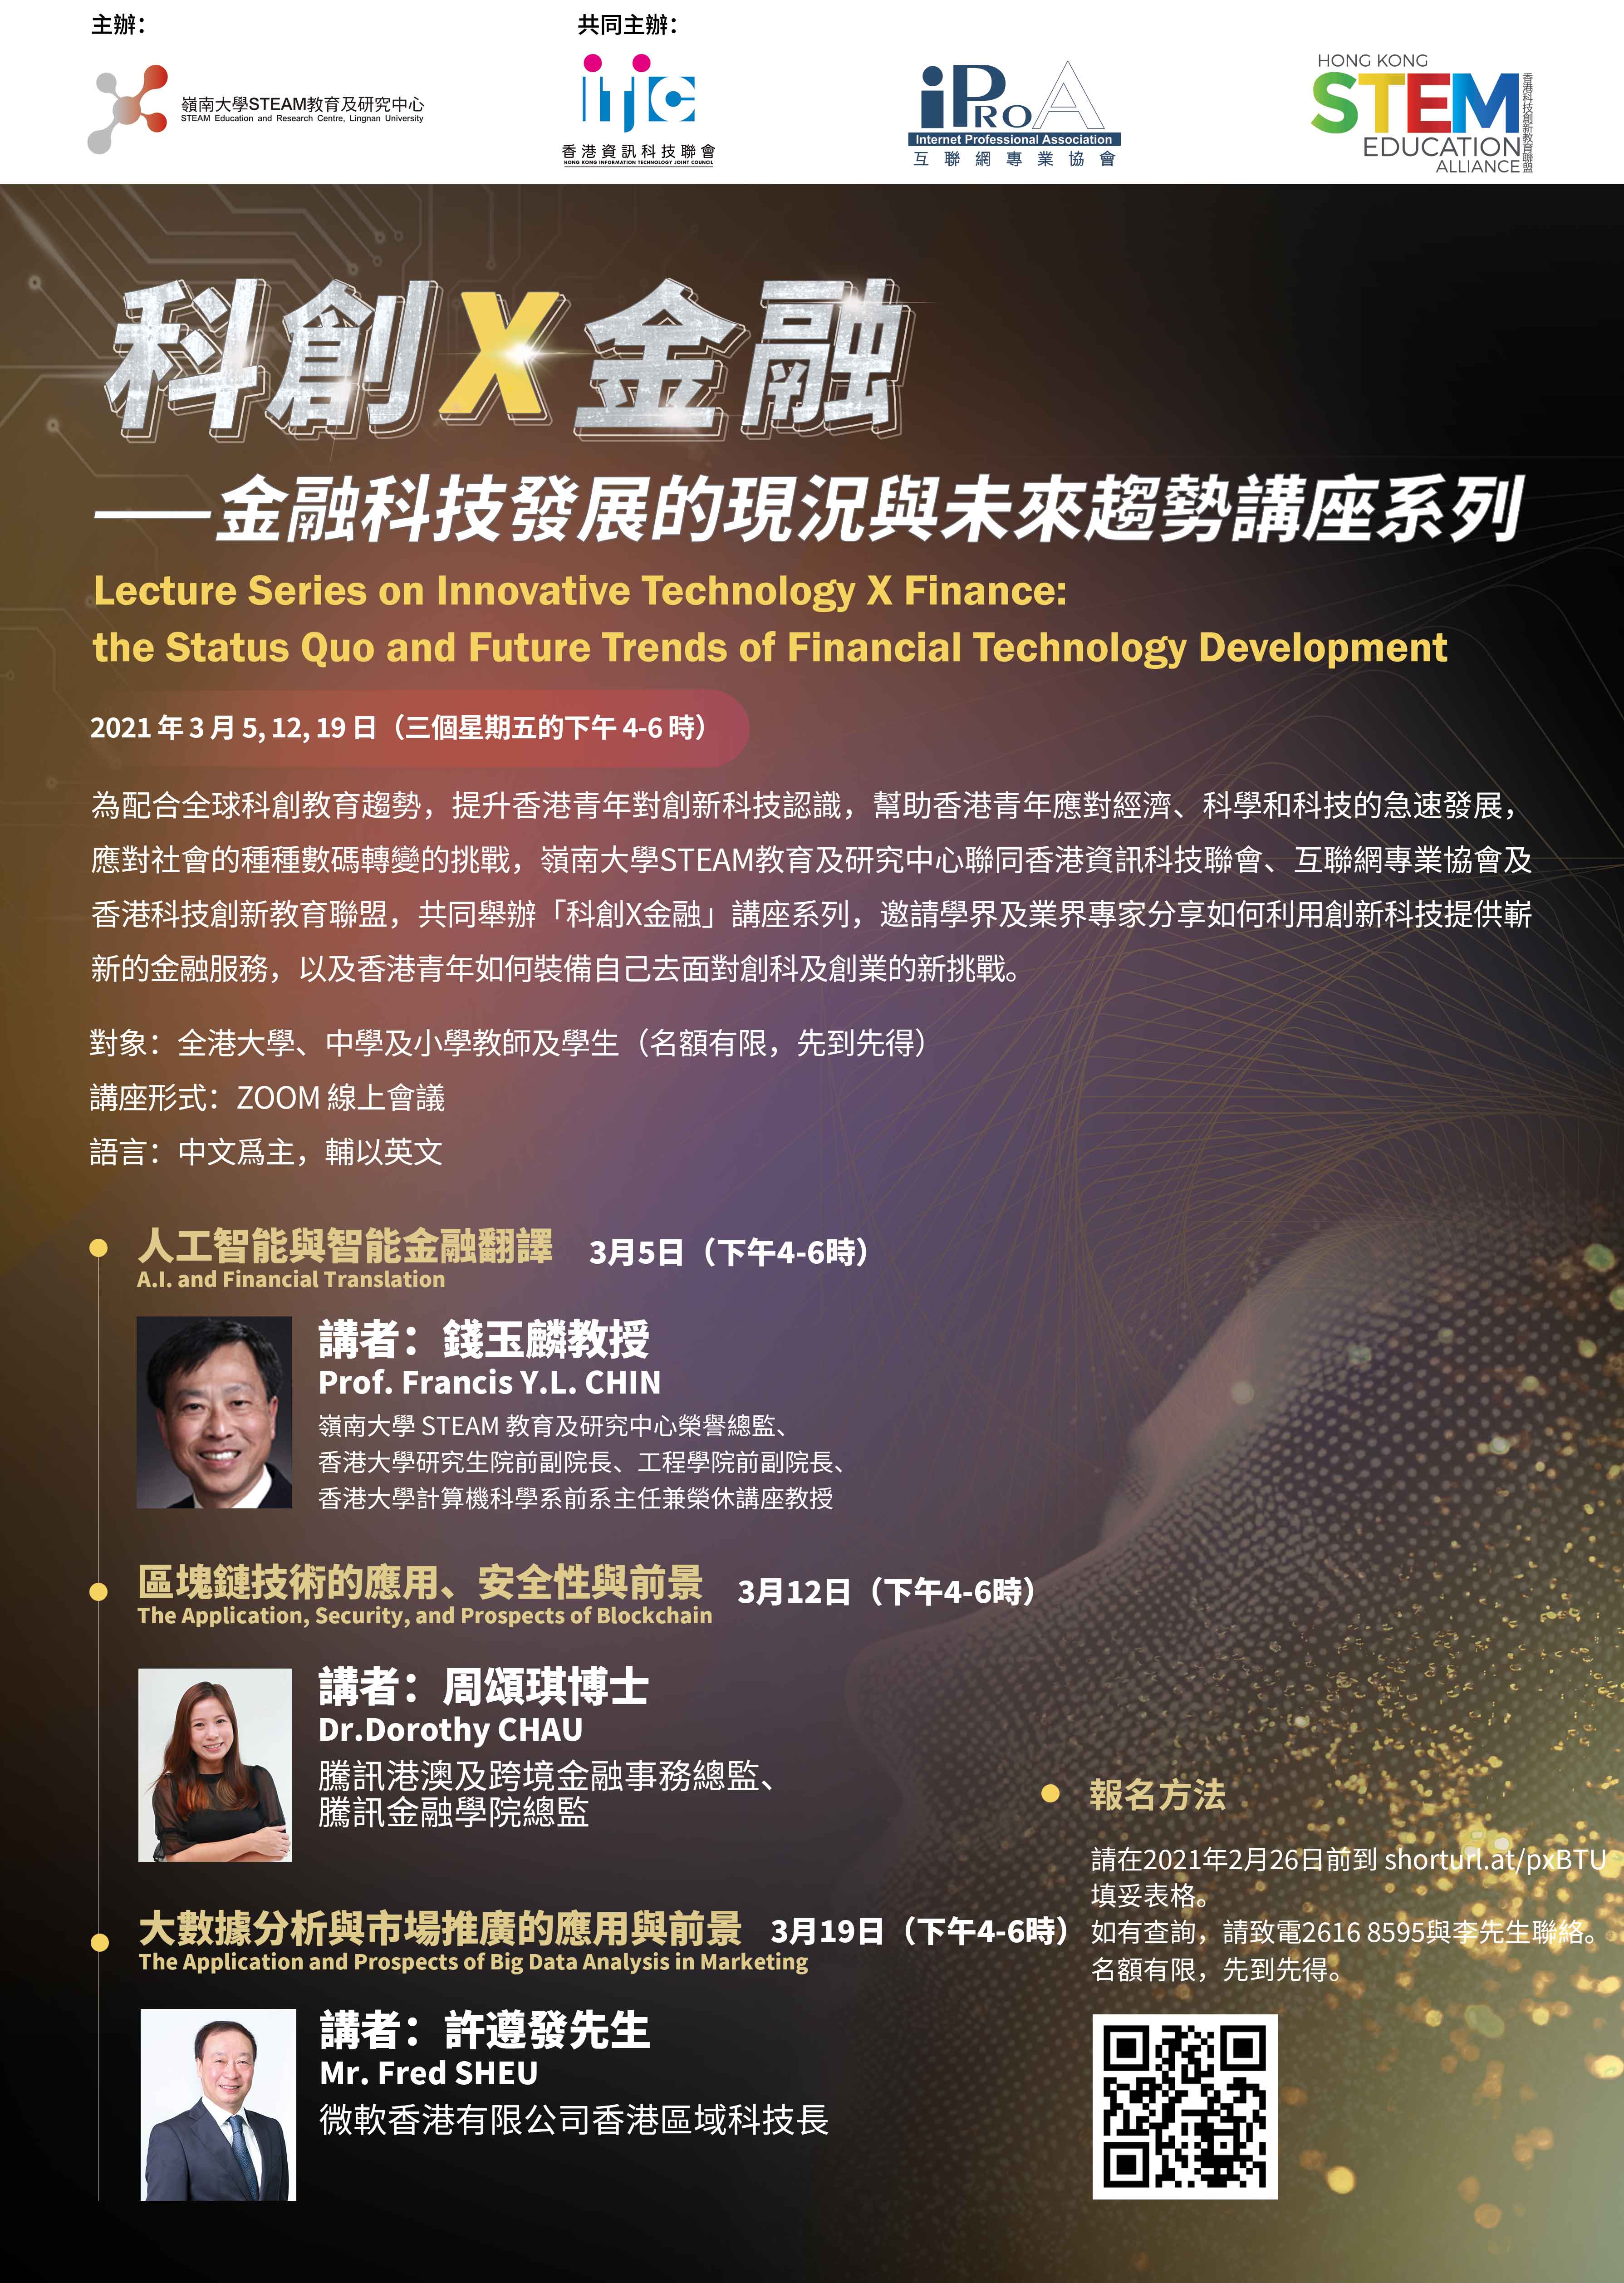 Lecture Series on Innovative Technology X Finance: the Status Quo and Future Trends of Financial Technology Development